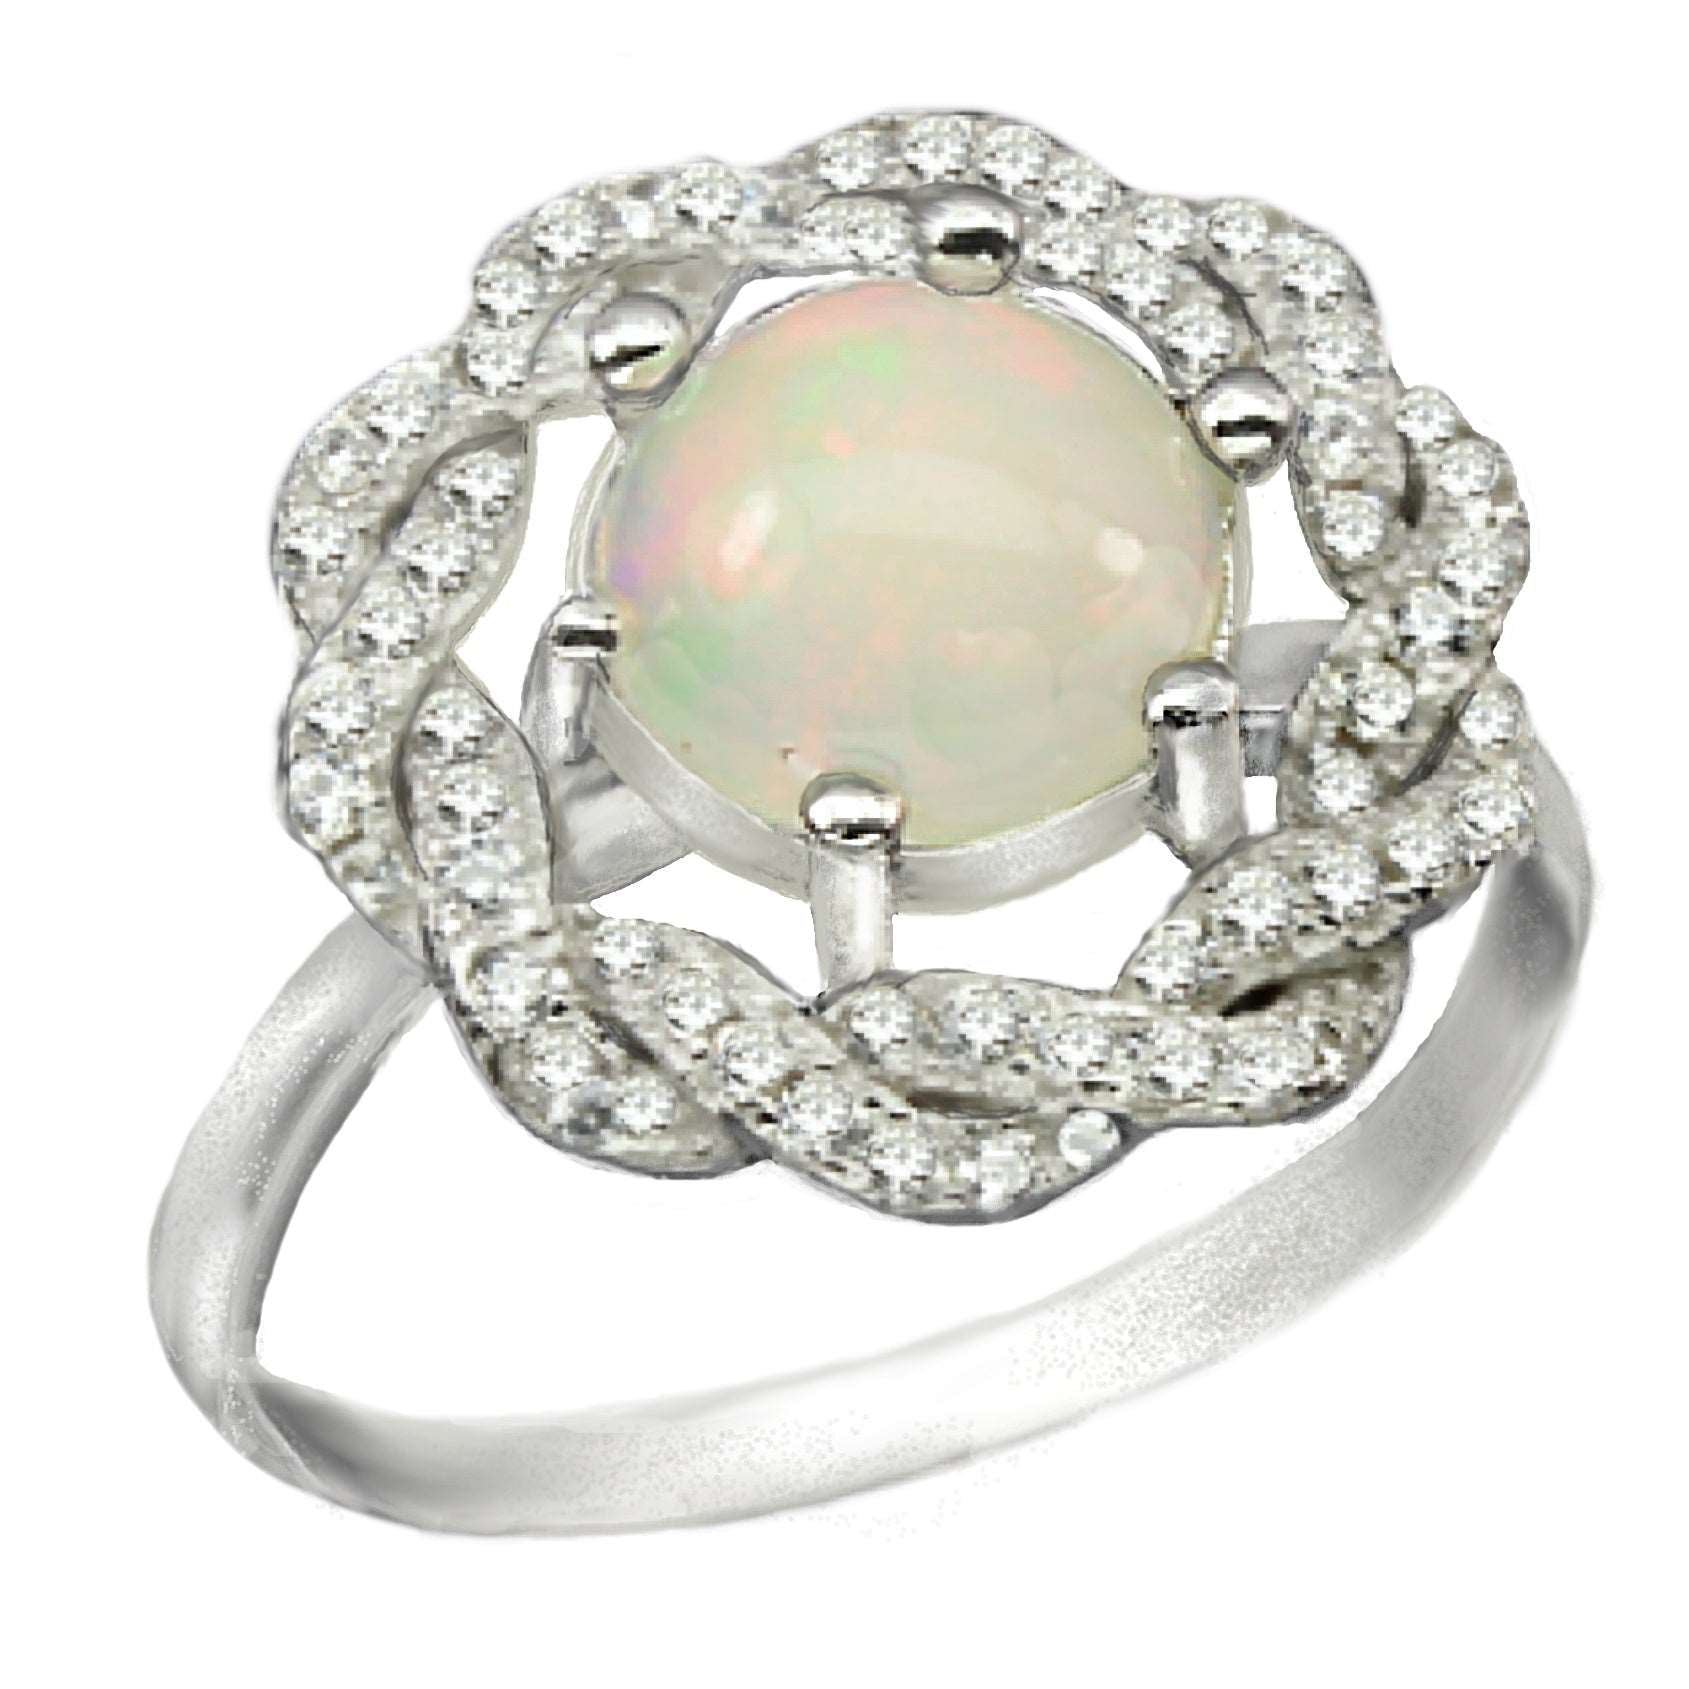 24.05 Cts Ethiopian Fire Opal Cz Gemstone Solid .925 Sterling Ring Size 9